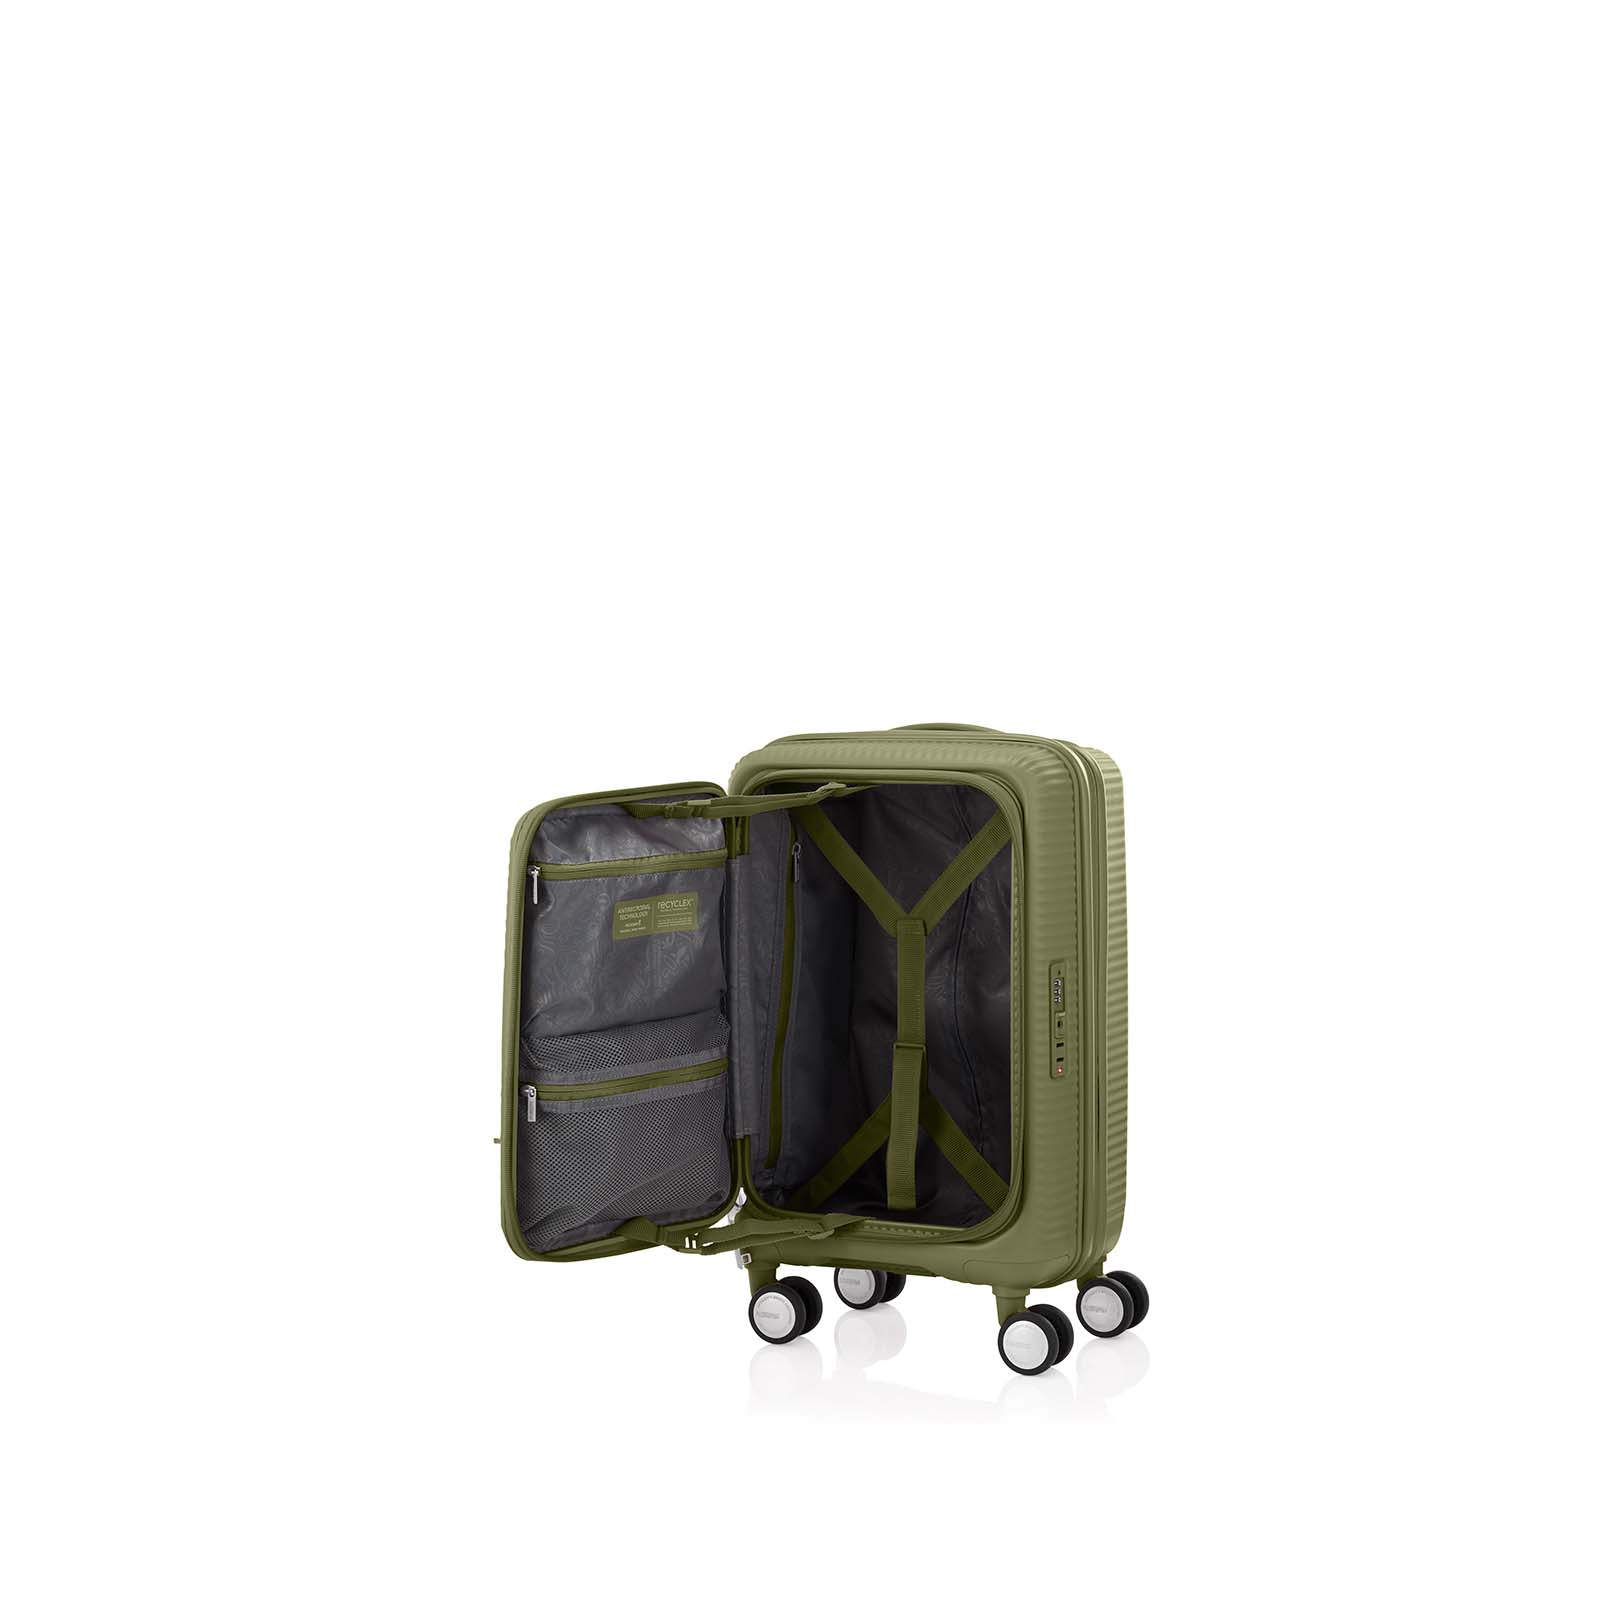 American-Tourister-Curio-Book-Opening-55cm-Carry-On-Suitcase-Khaki-Open